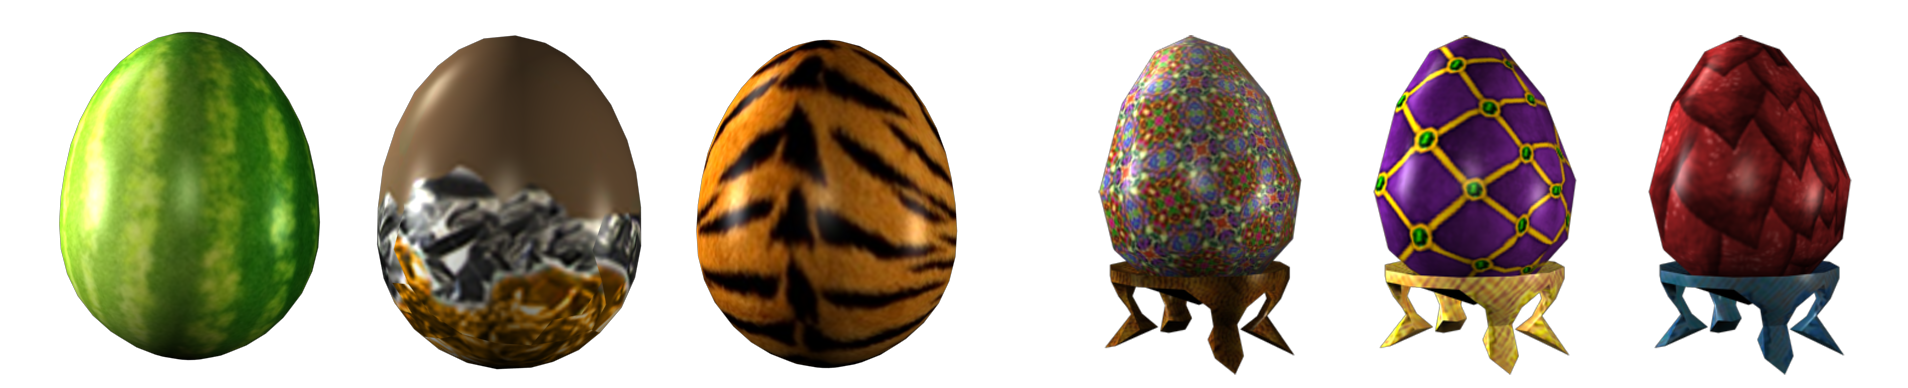 Presenting The Winners Of The Egg And Face Design Contests Roblox Blog - tiger skin egg roblox